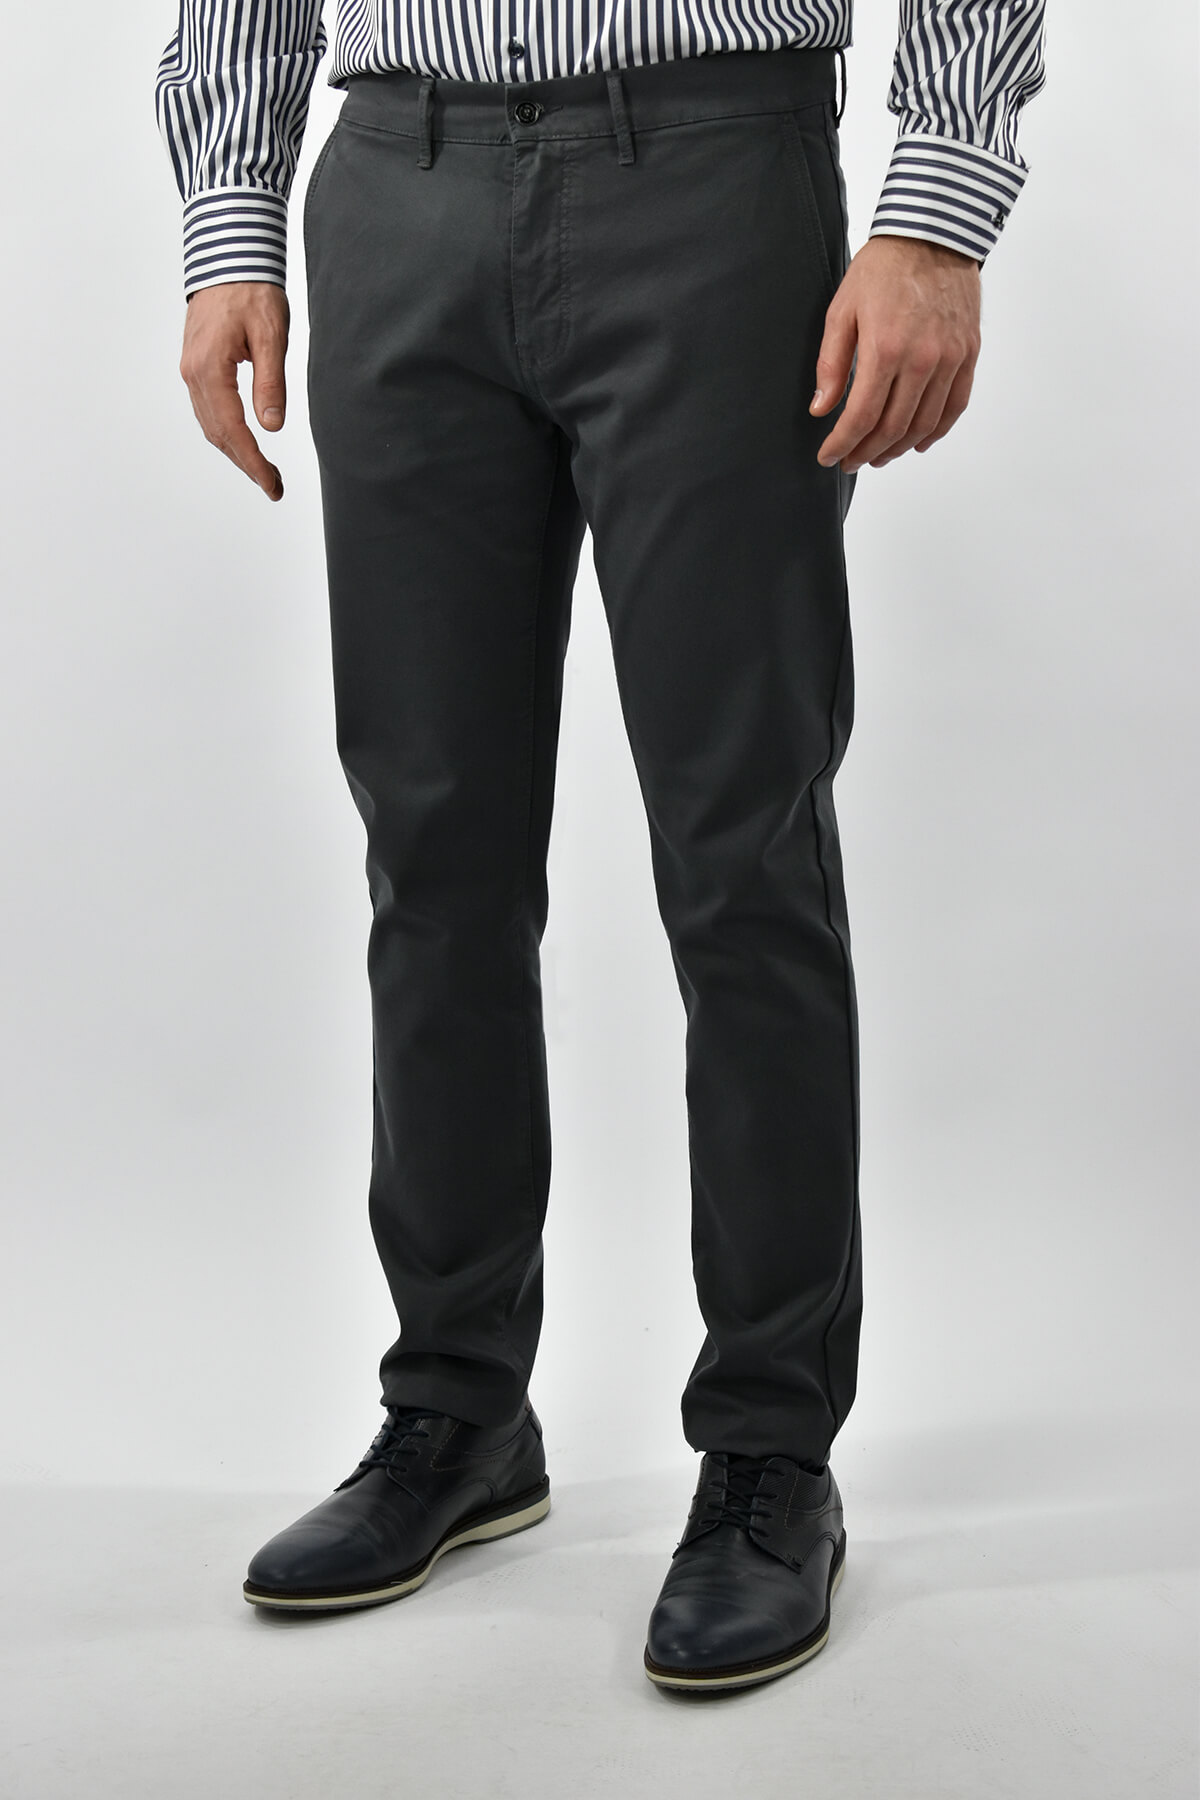 LCDN Παντελόνι Chinos Abery Skinny